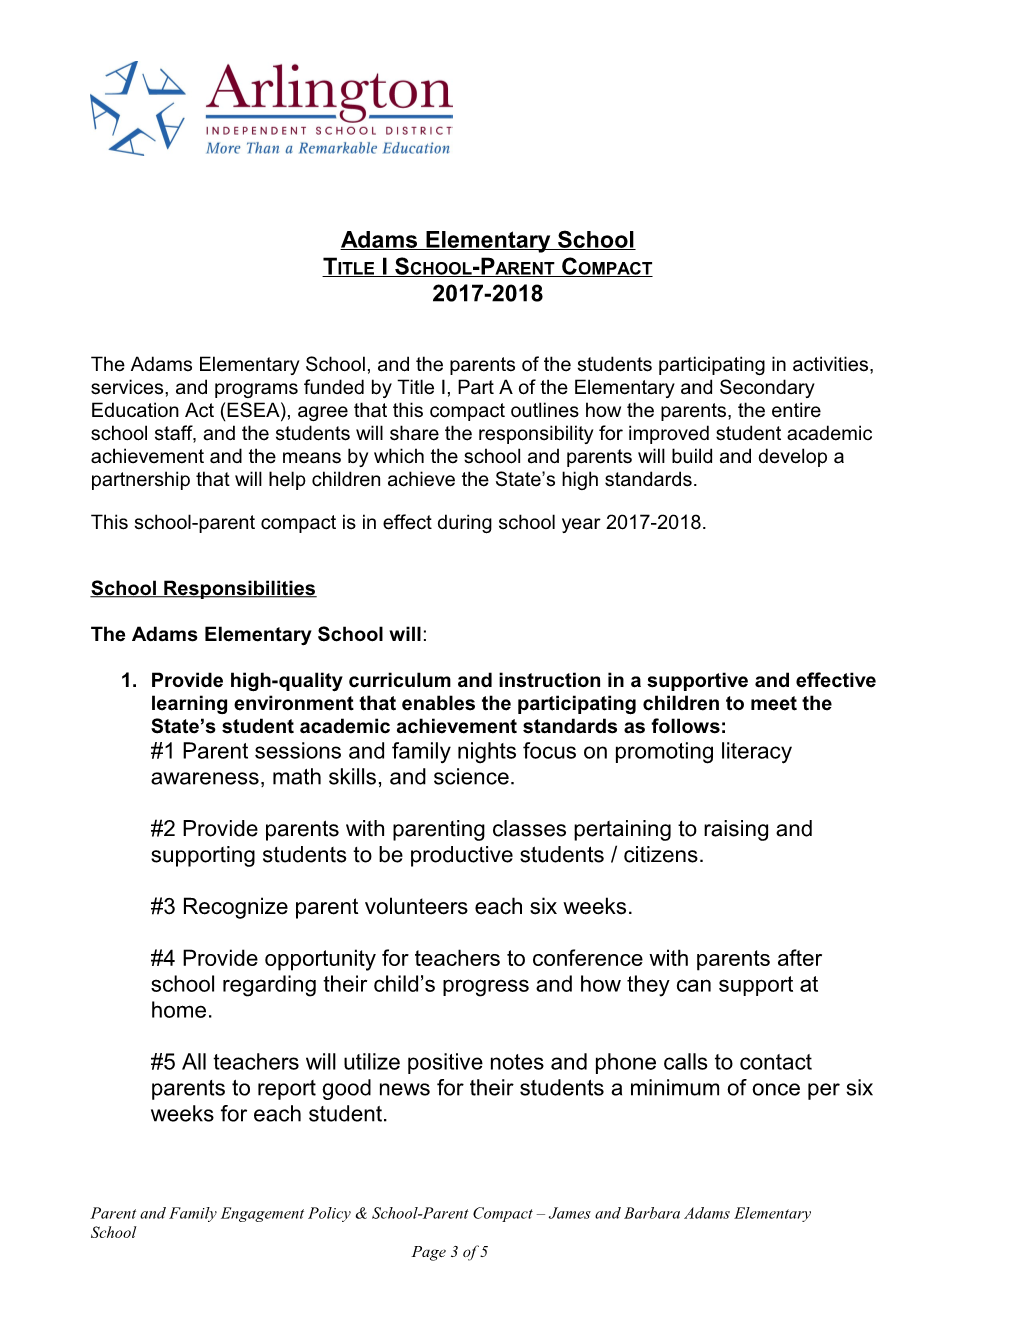 SAMPLE TEMPLATE* for Campus Level Parent Involvement Policy and School-Parent Compact